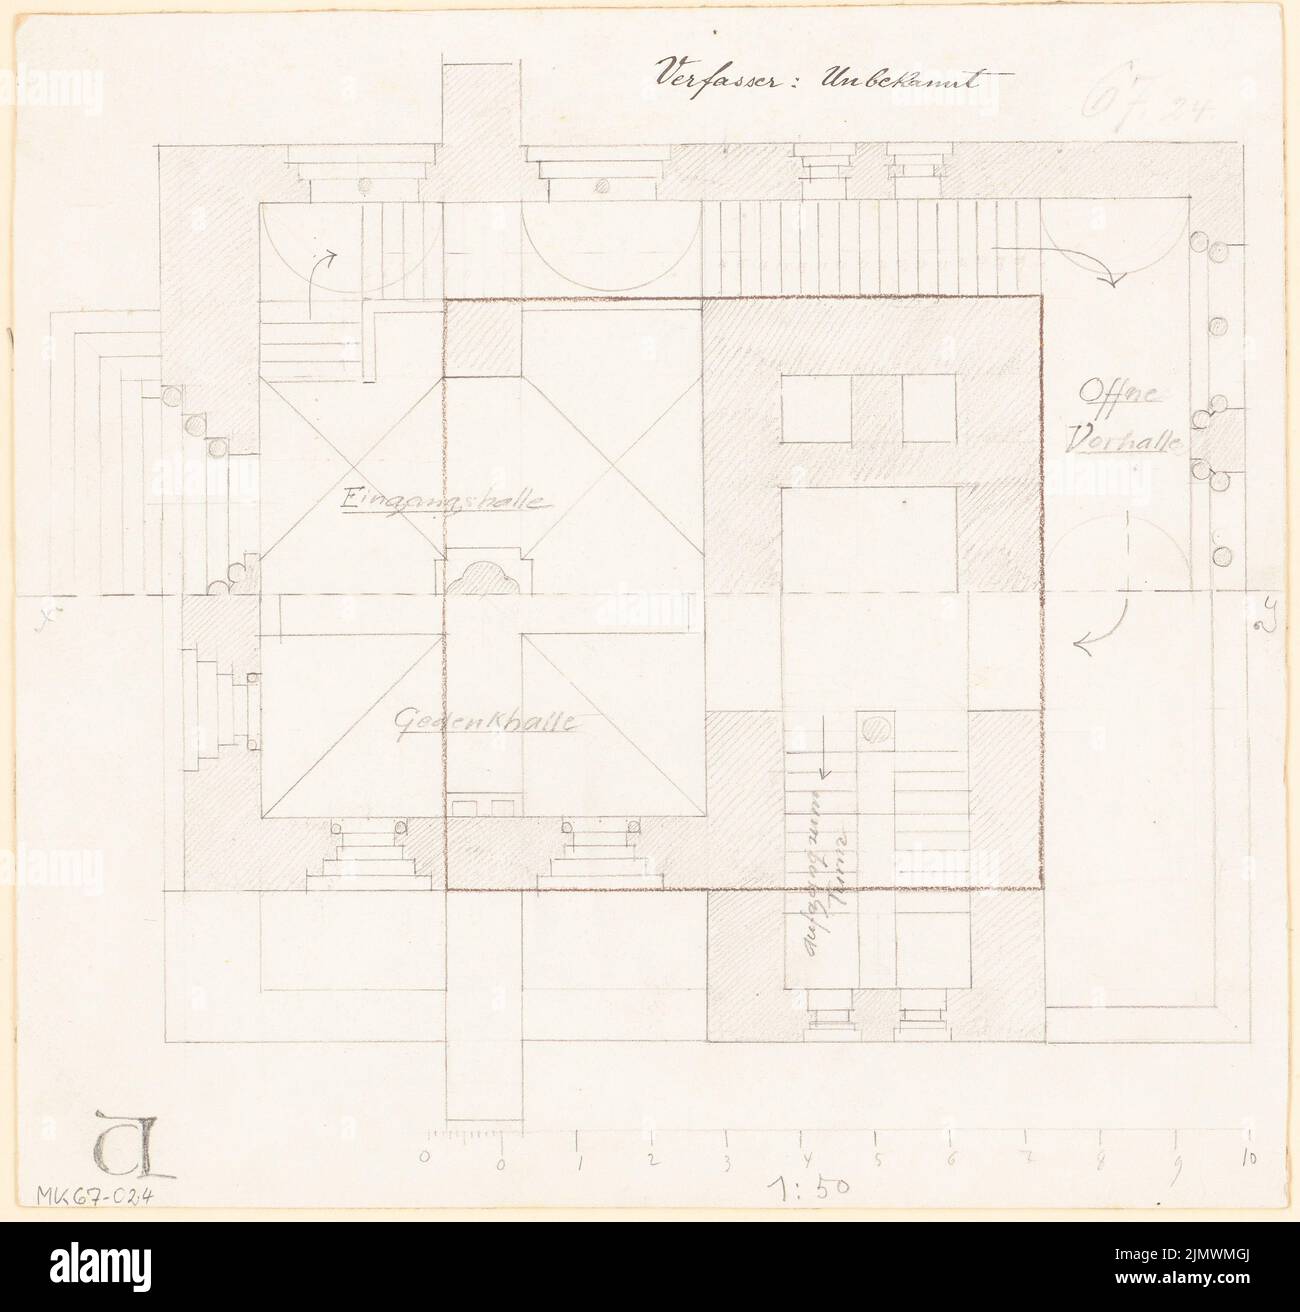 Unknown architect, lookout tower with a memorial hall. Monthly competition November 1897 (11.1897): floor plan on two levels 1:50; Scale bar. Pencil on cardboard, supplemented with colored pencil, 32.6 x 34.7 cm (including scan edges) N.N. : Aussichtsturm mit Gedenkhalle. Monatskonkurrenz November 1897 Stock Photo